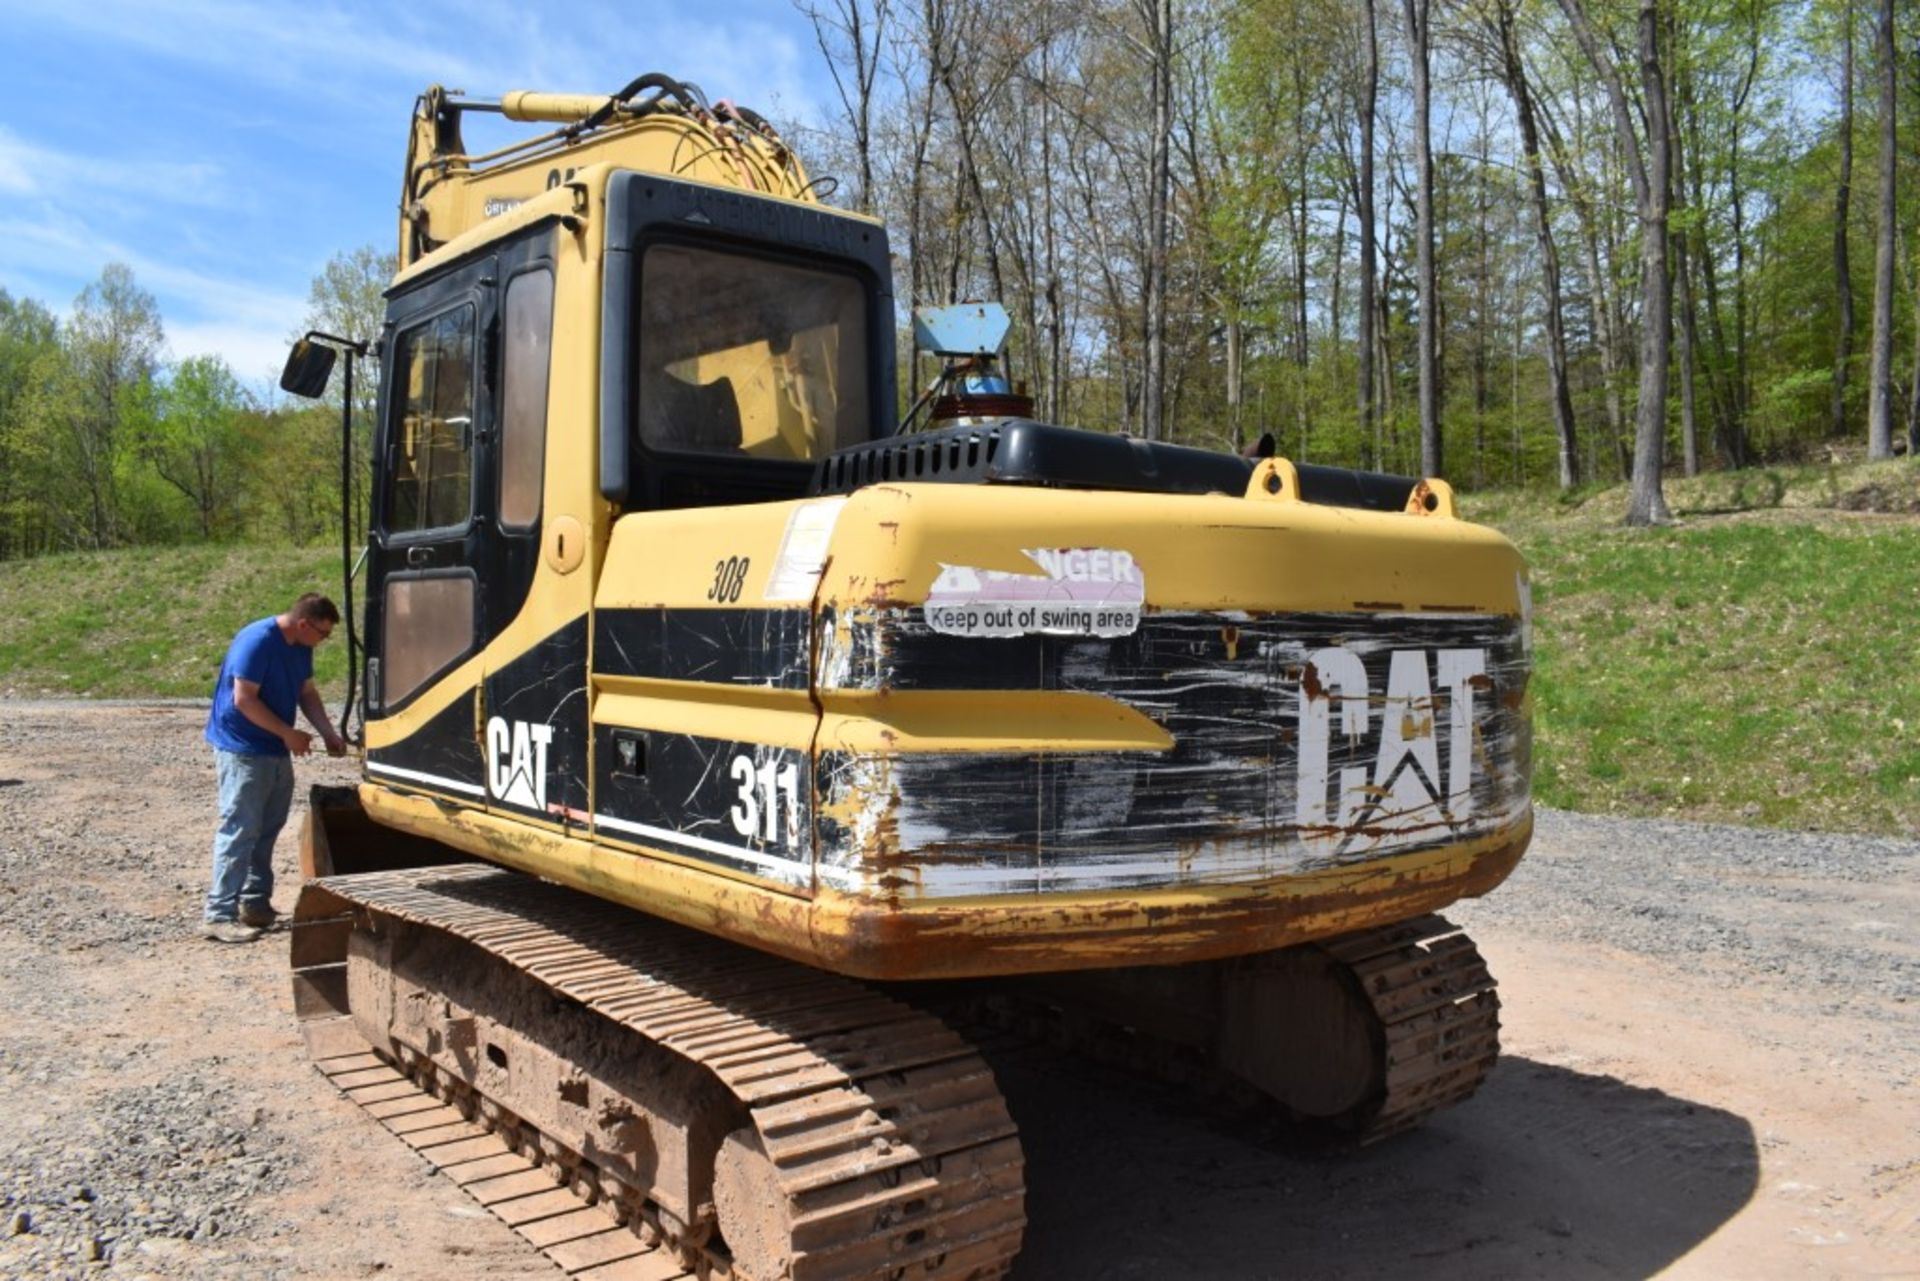 CAT 311 Excavator 21370 Hours, Runs and Operates, WR 48" Hydraulic Swivel Bucket, Auxiliary - Image 17 of 42